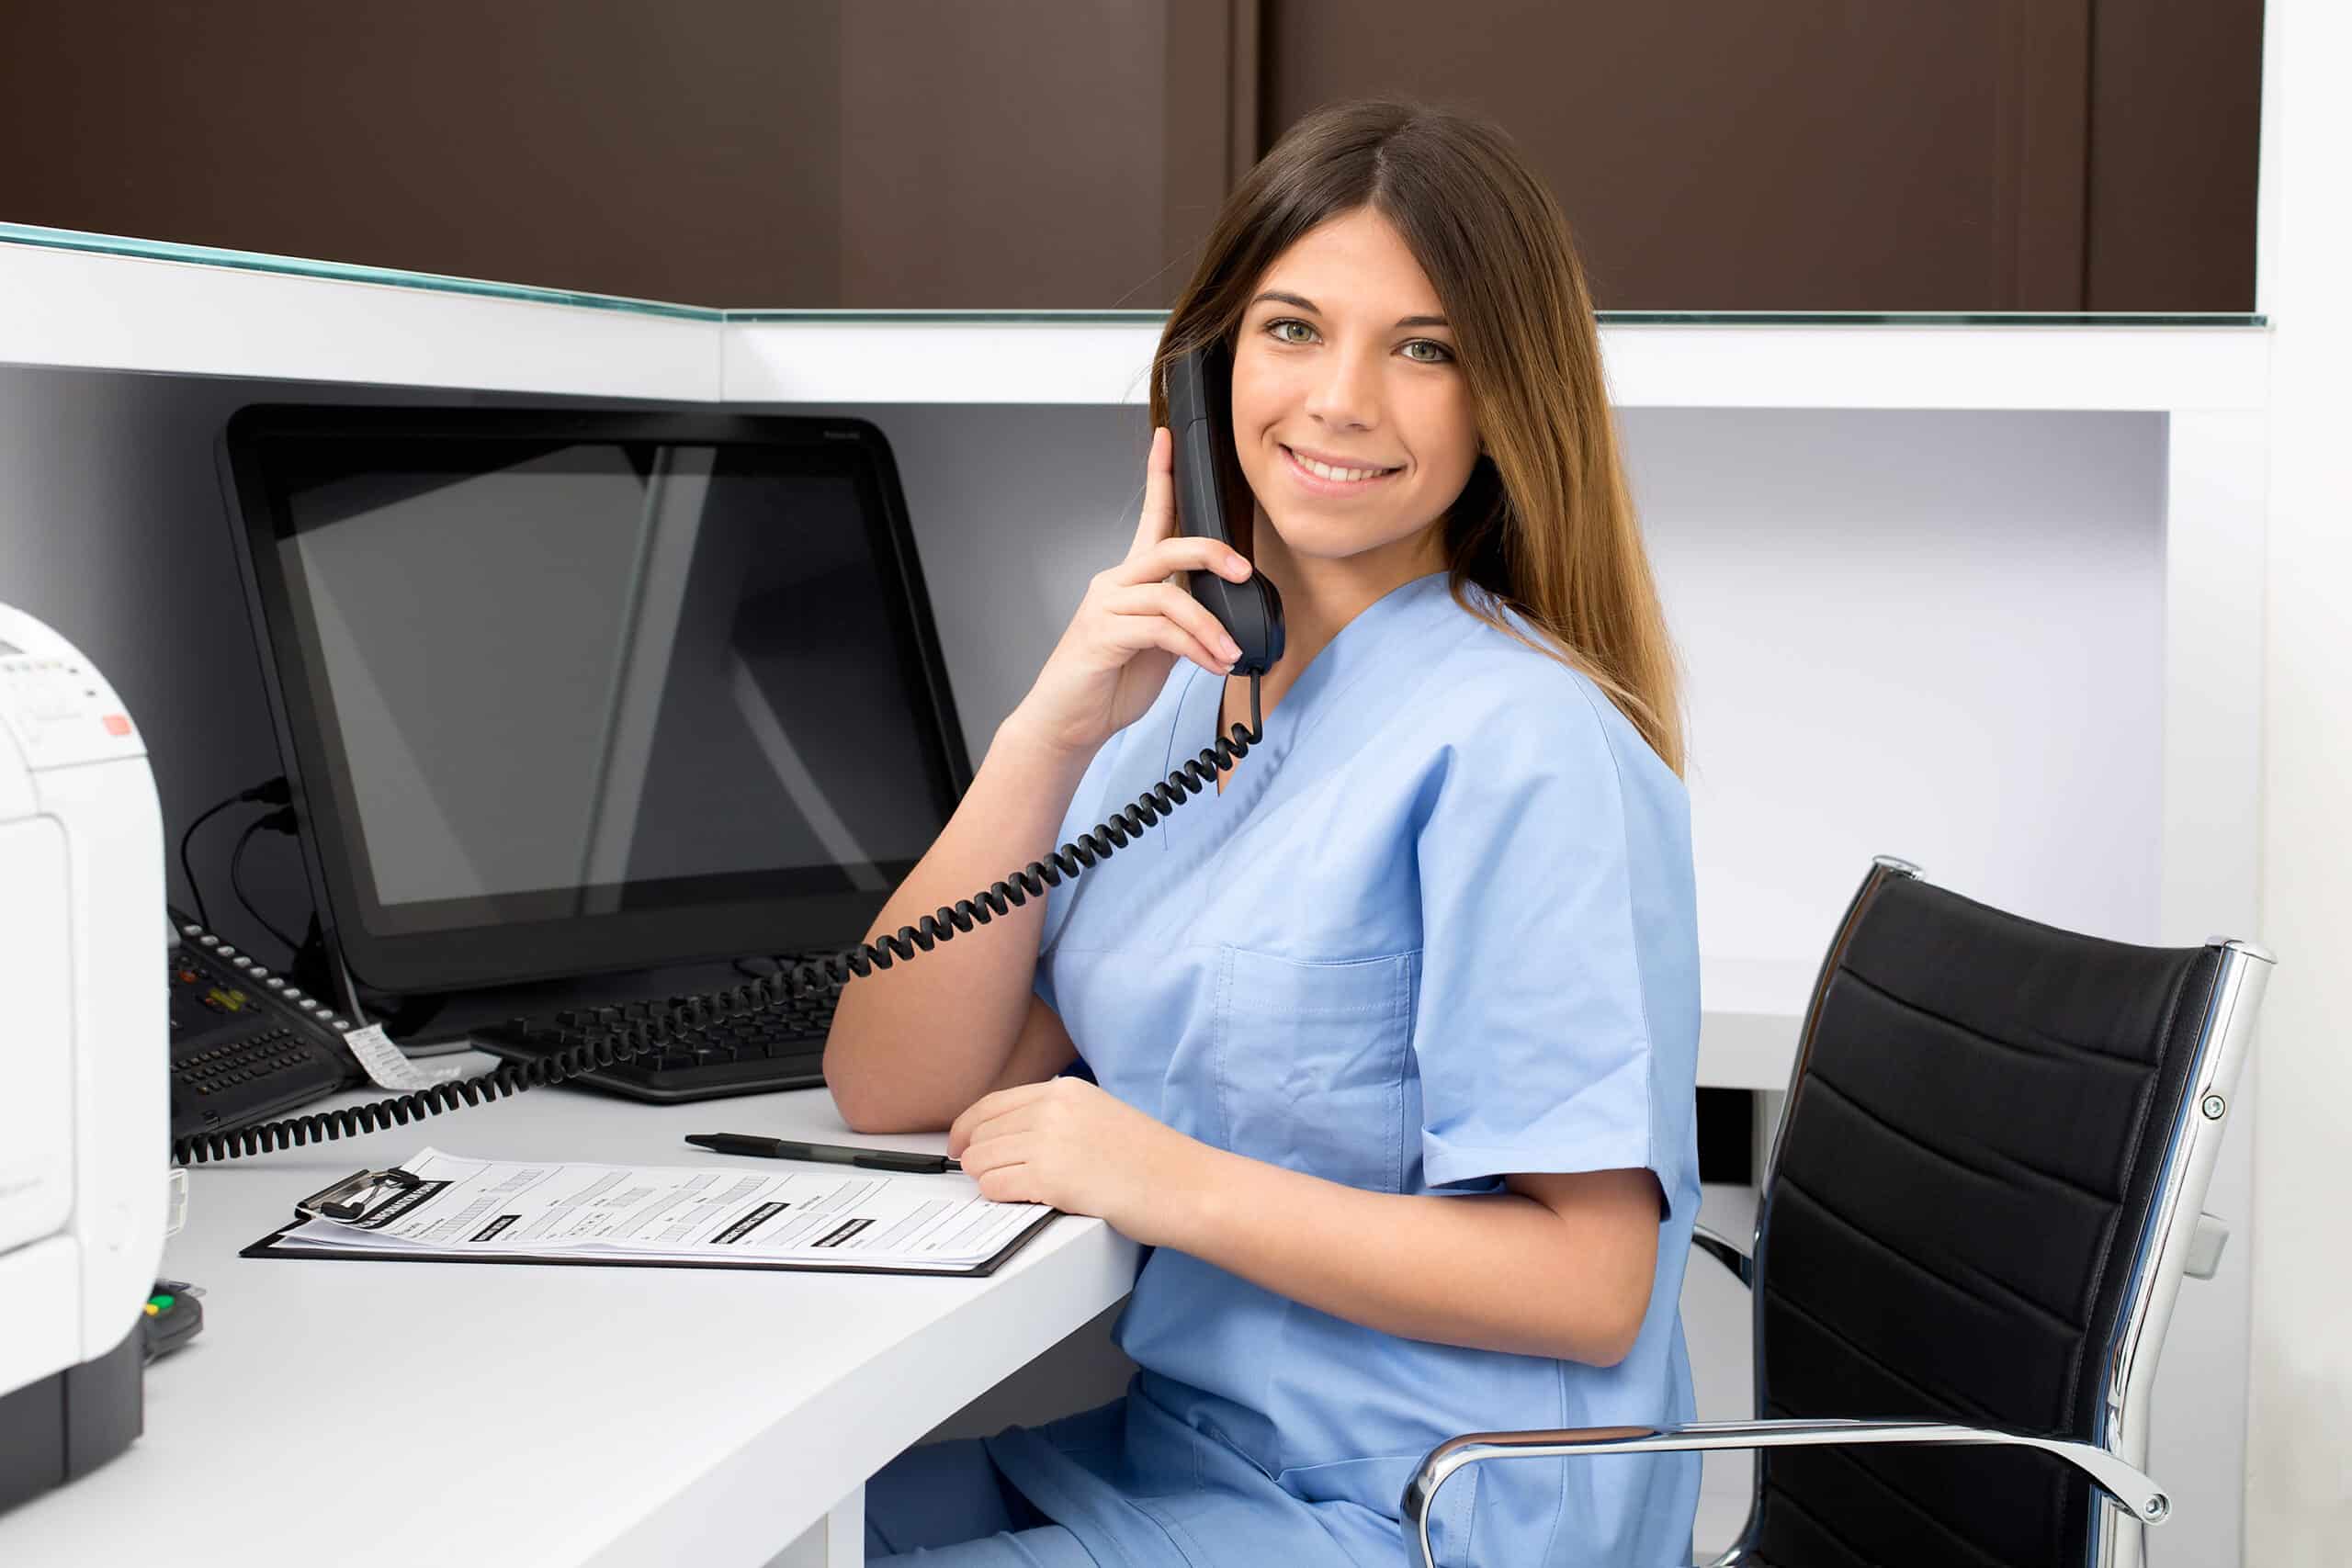 Female Nurse answering phone at desk with computer